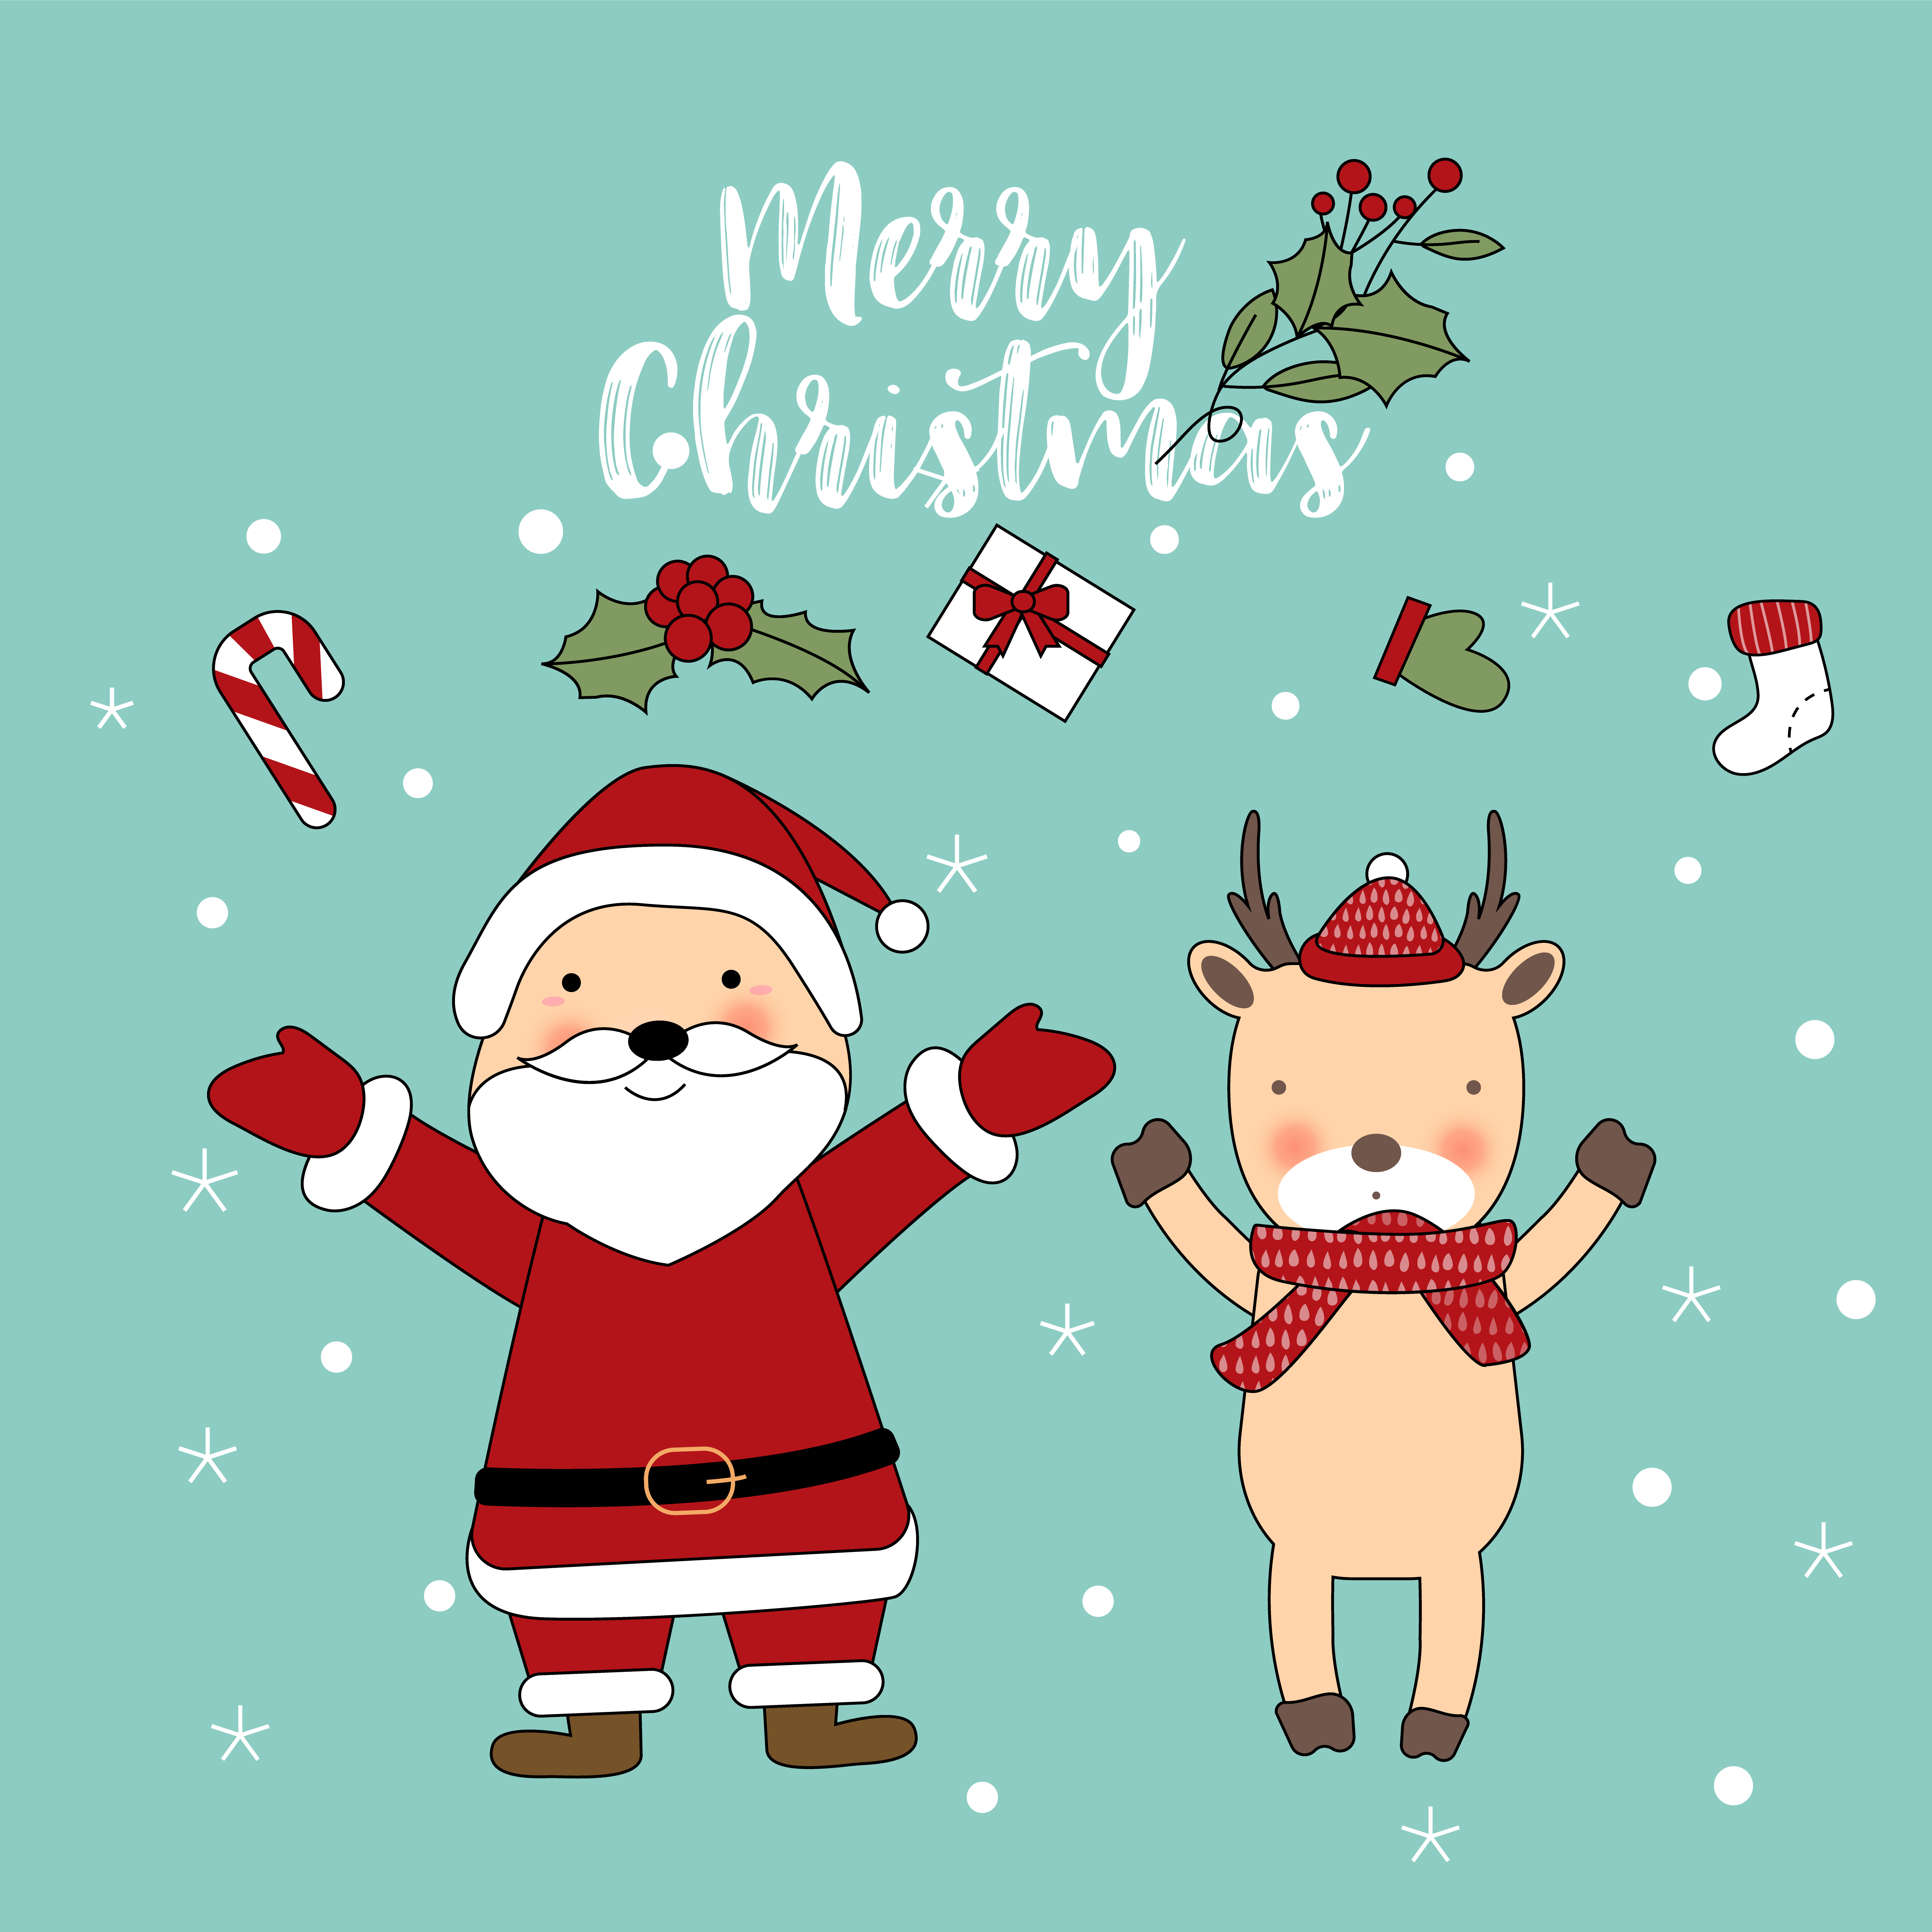 Download Merry Christmas Cute Greeting Card for free.